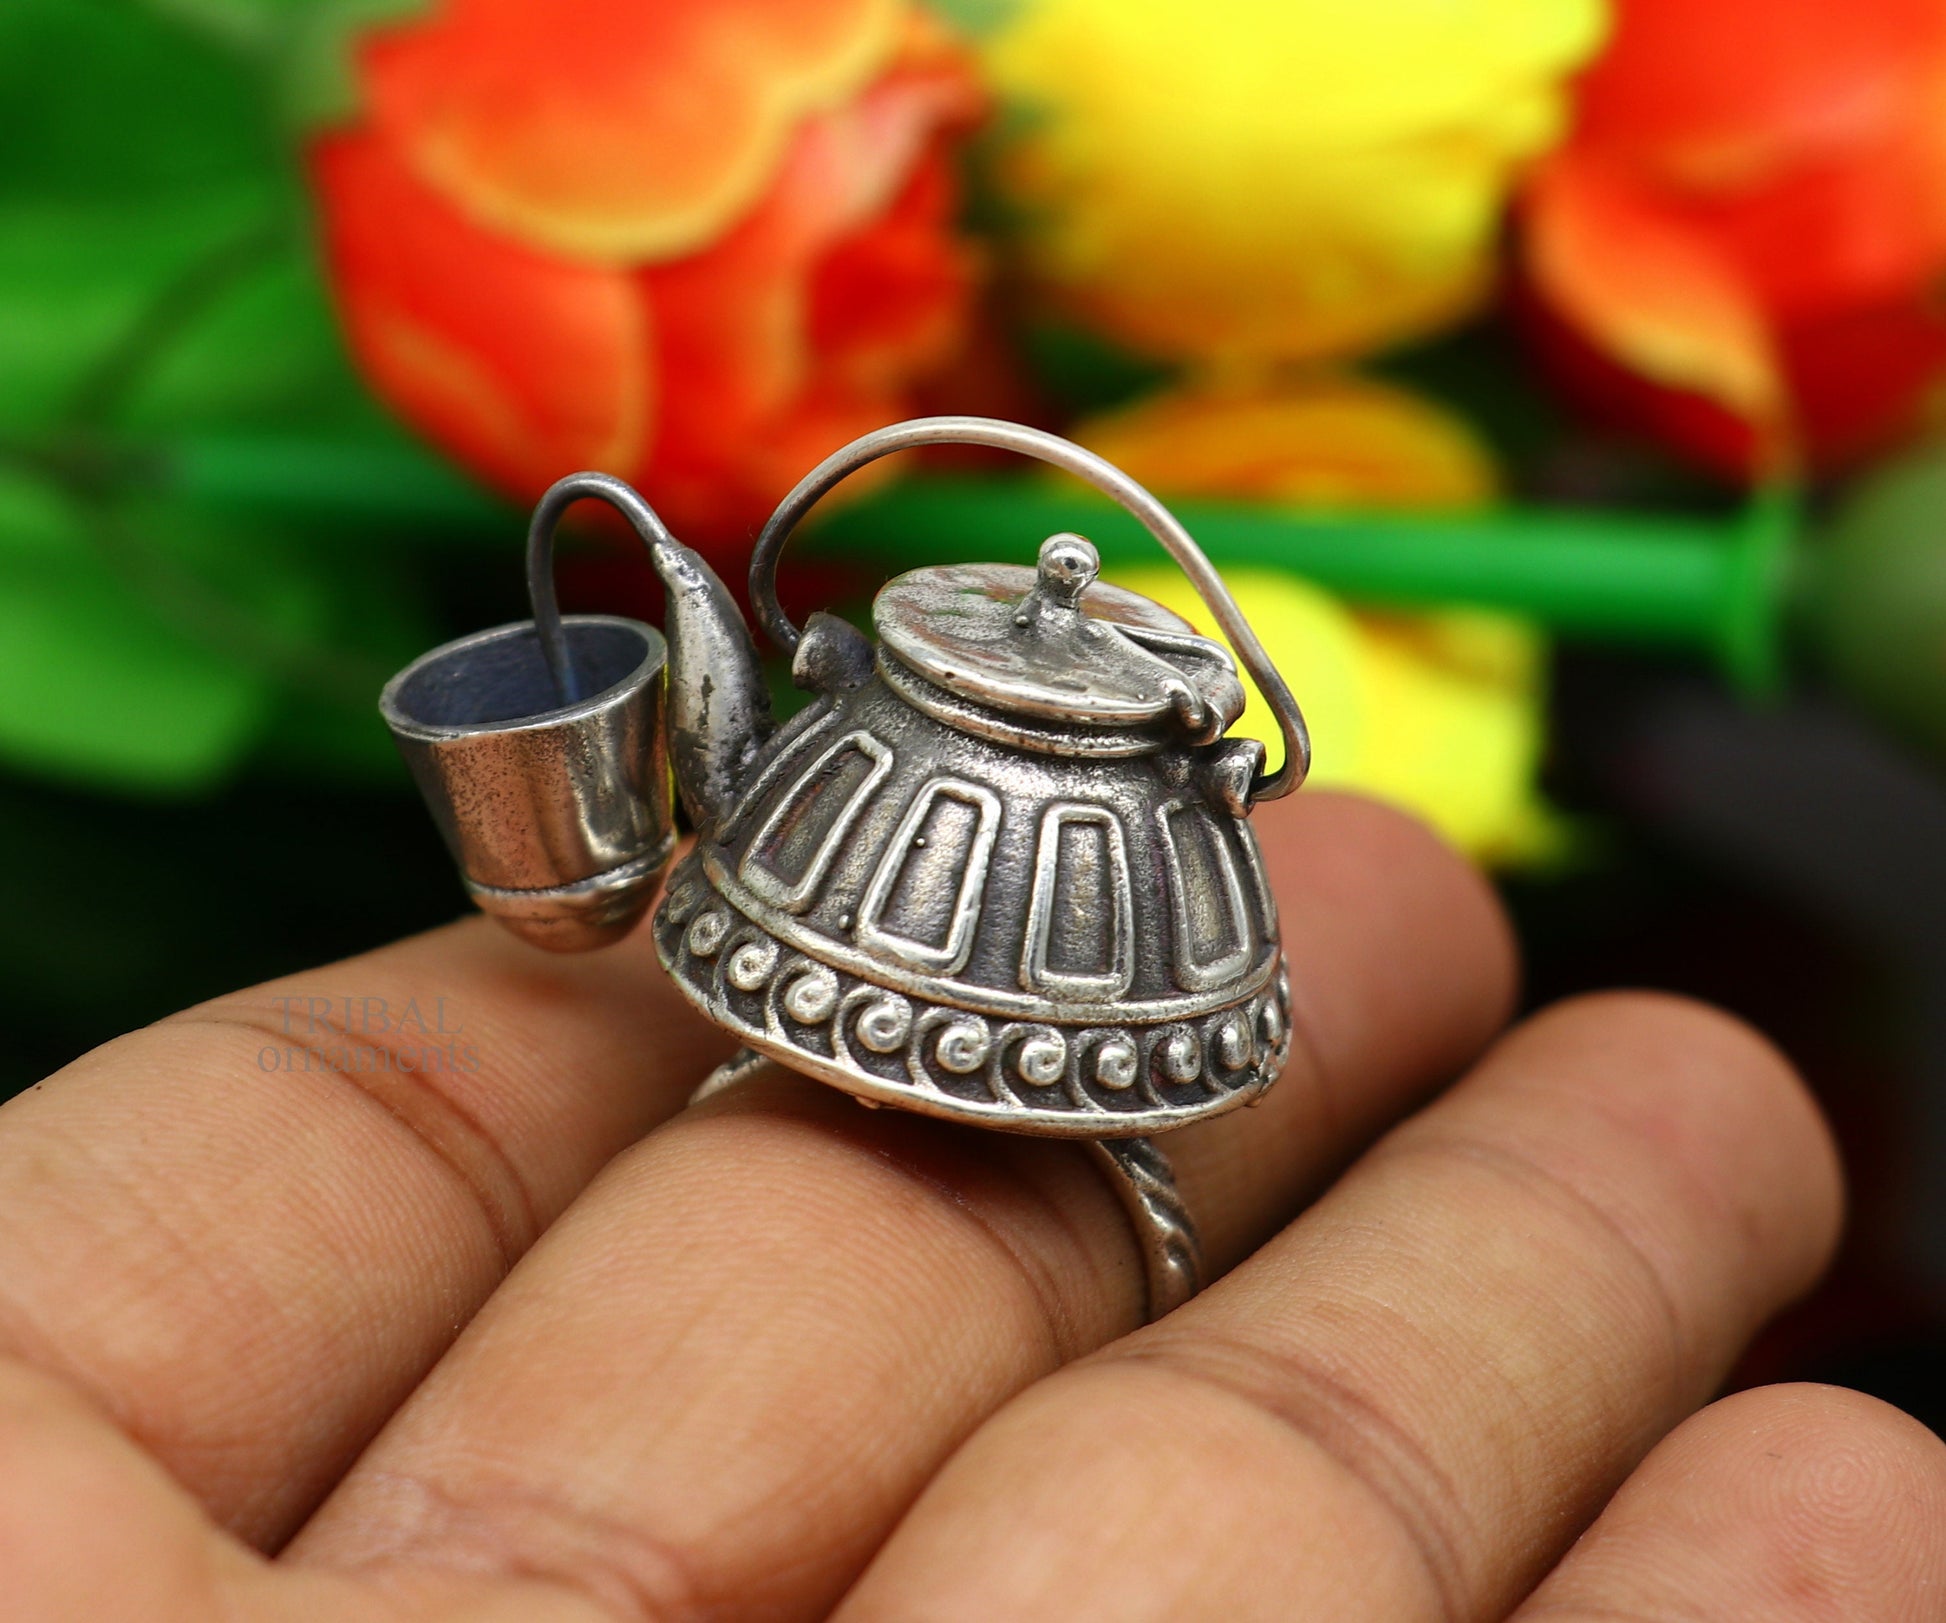 925 sterling silver Traditional vintage tea pot design handmade stylish ring women's tribal charm ring brides jewelry India sr329 - TRIBAL ORNAMENTS